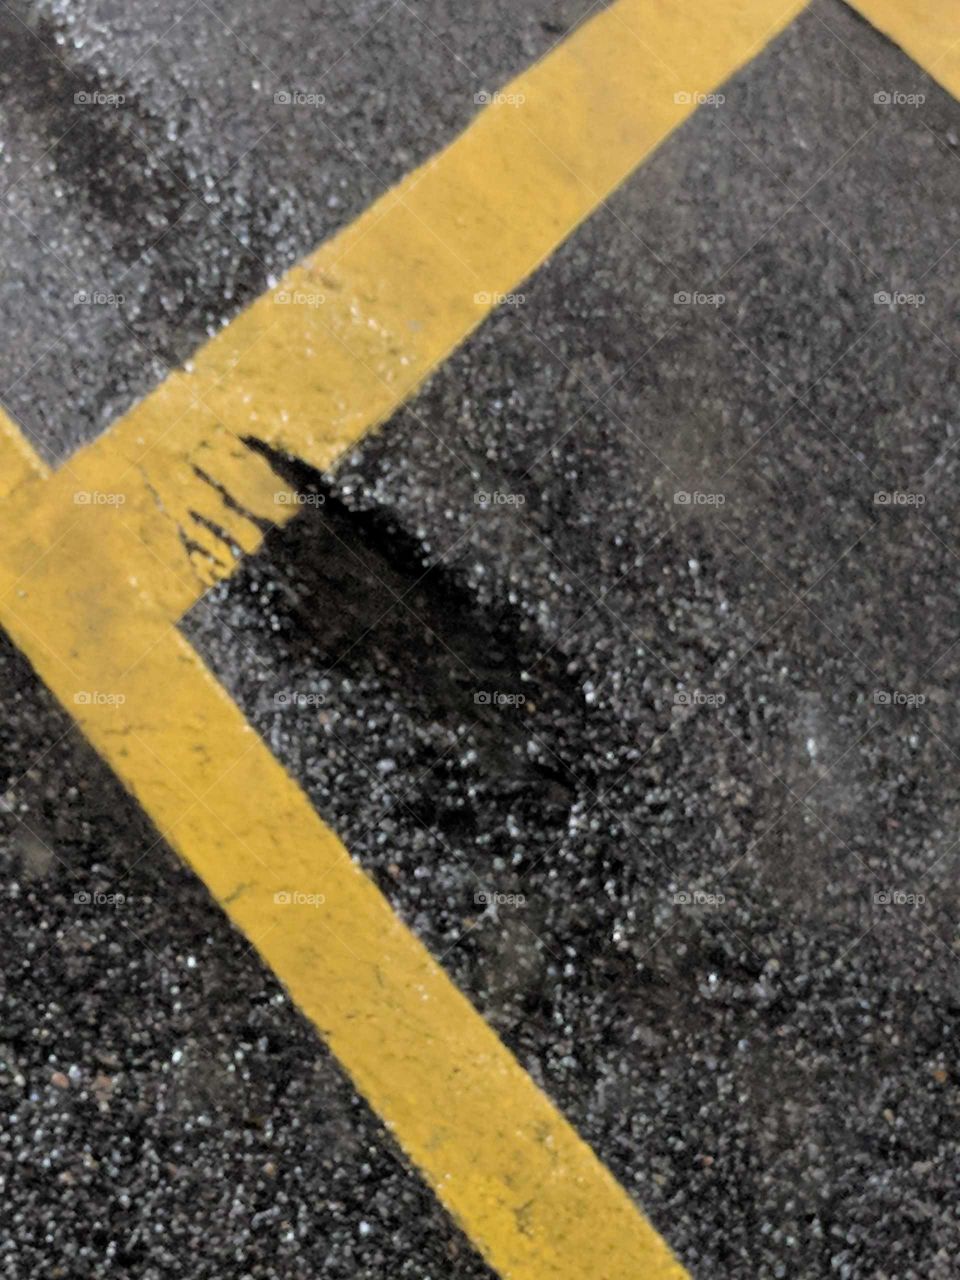 Bigfoot or Sasquatch footprint caught in a parking lot concrete substance.